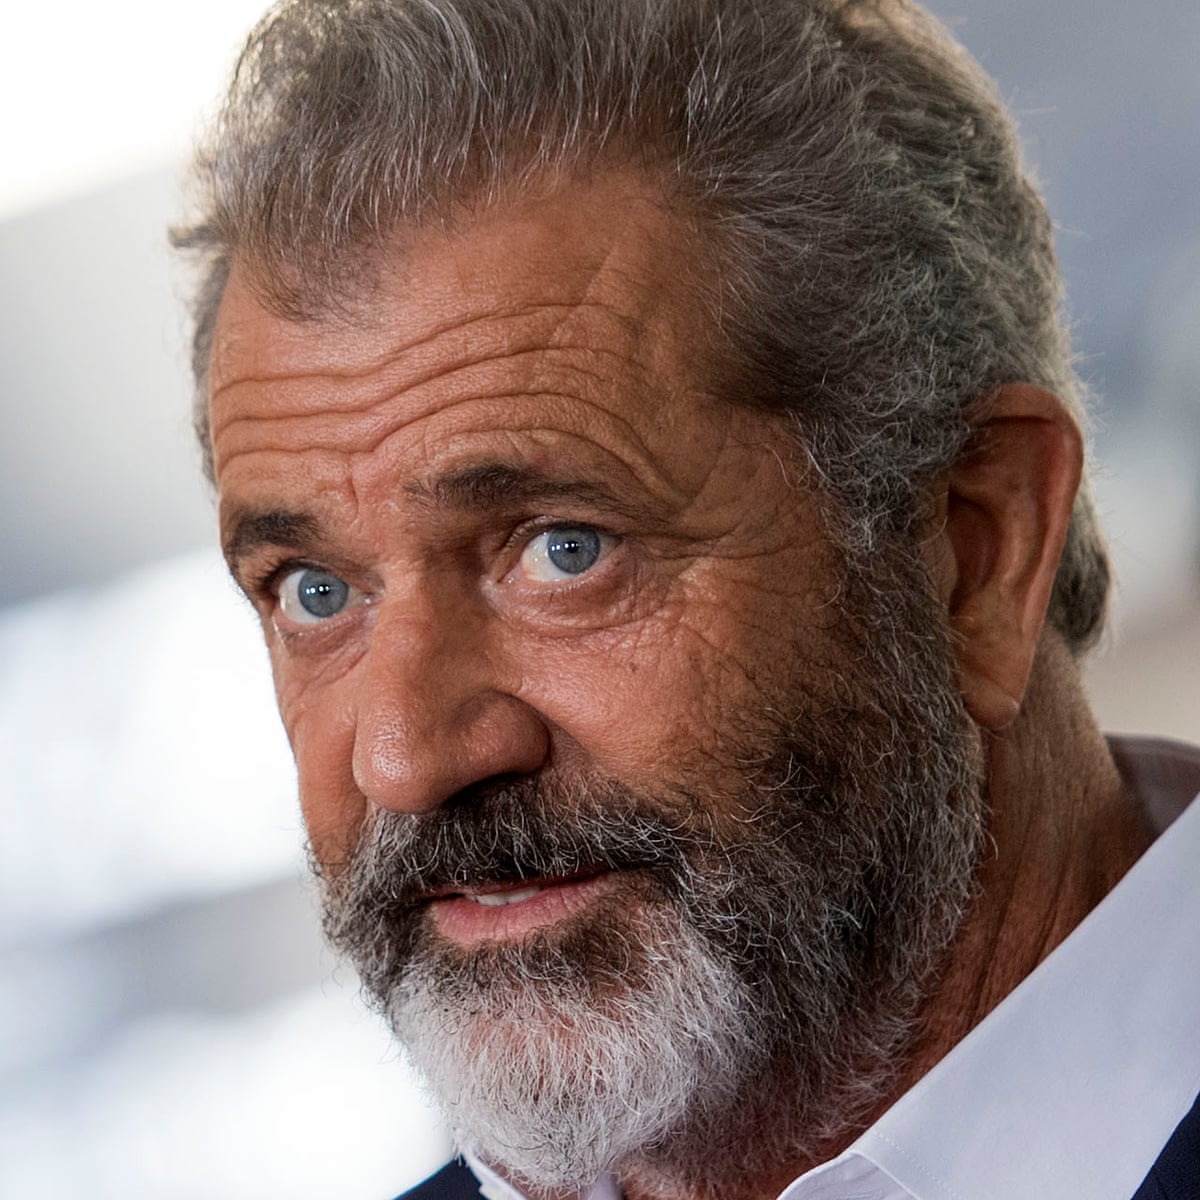 mel Gibson Casting In Rothchild Comedy Sparks Outrage Mel Gibson The Guardian